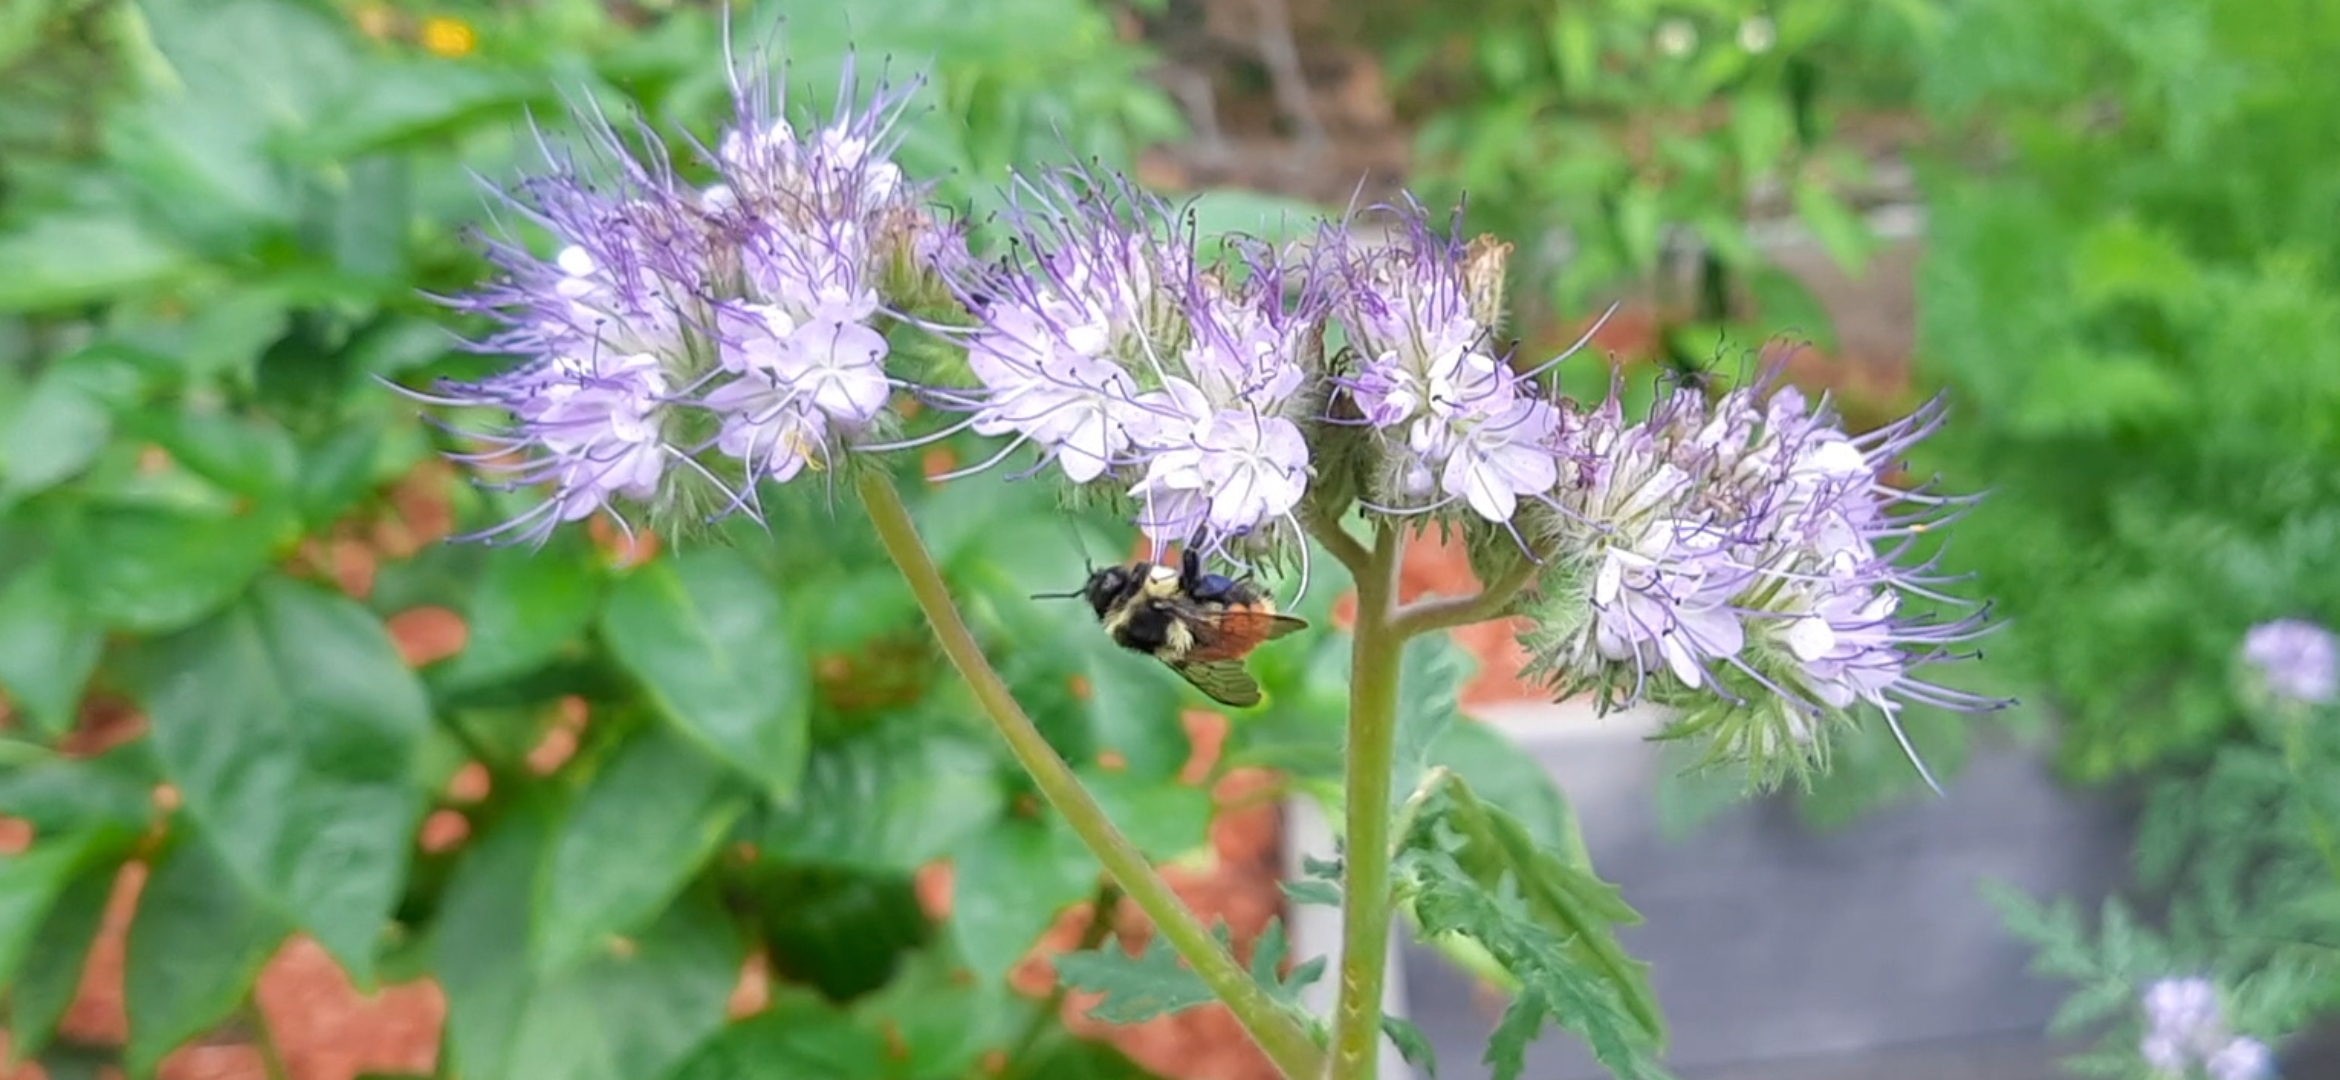 A large bee on some flowers